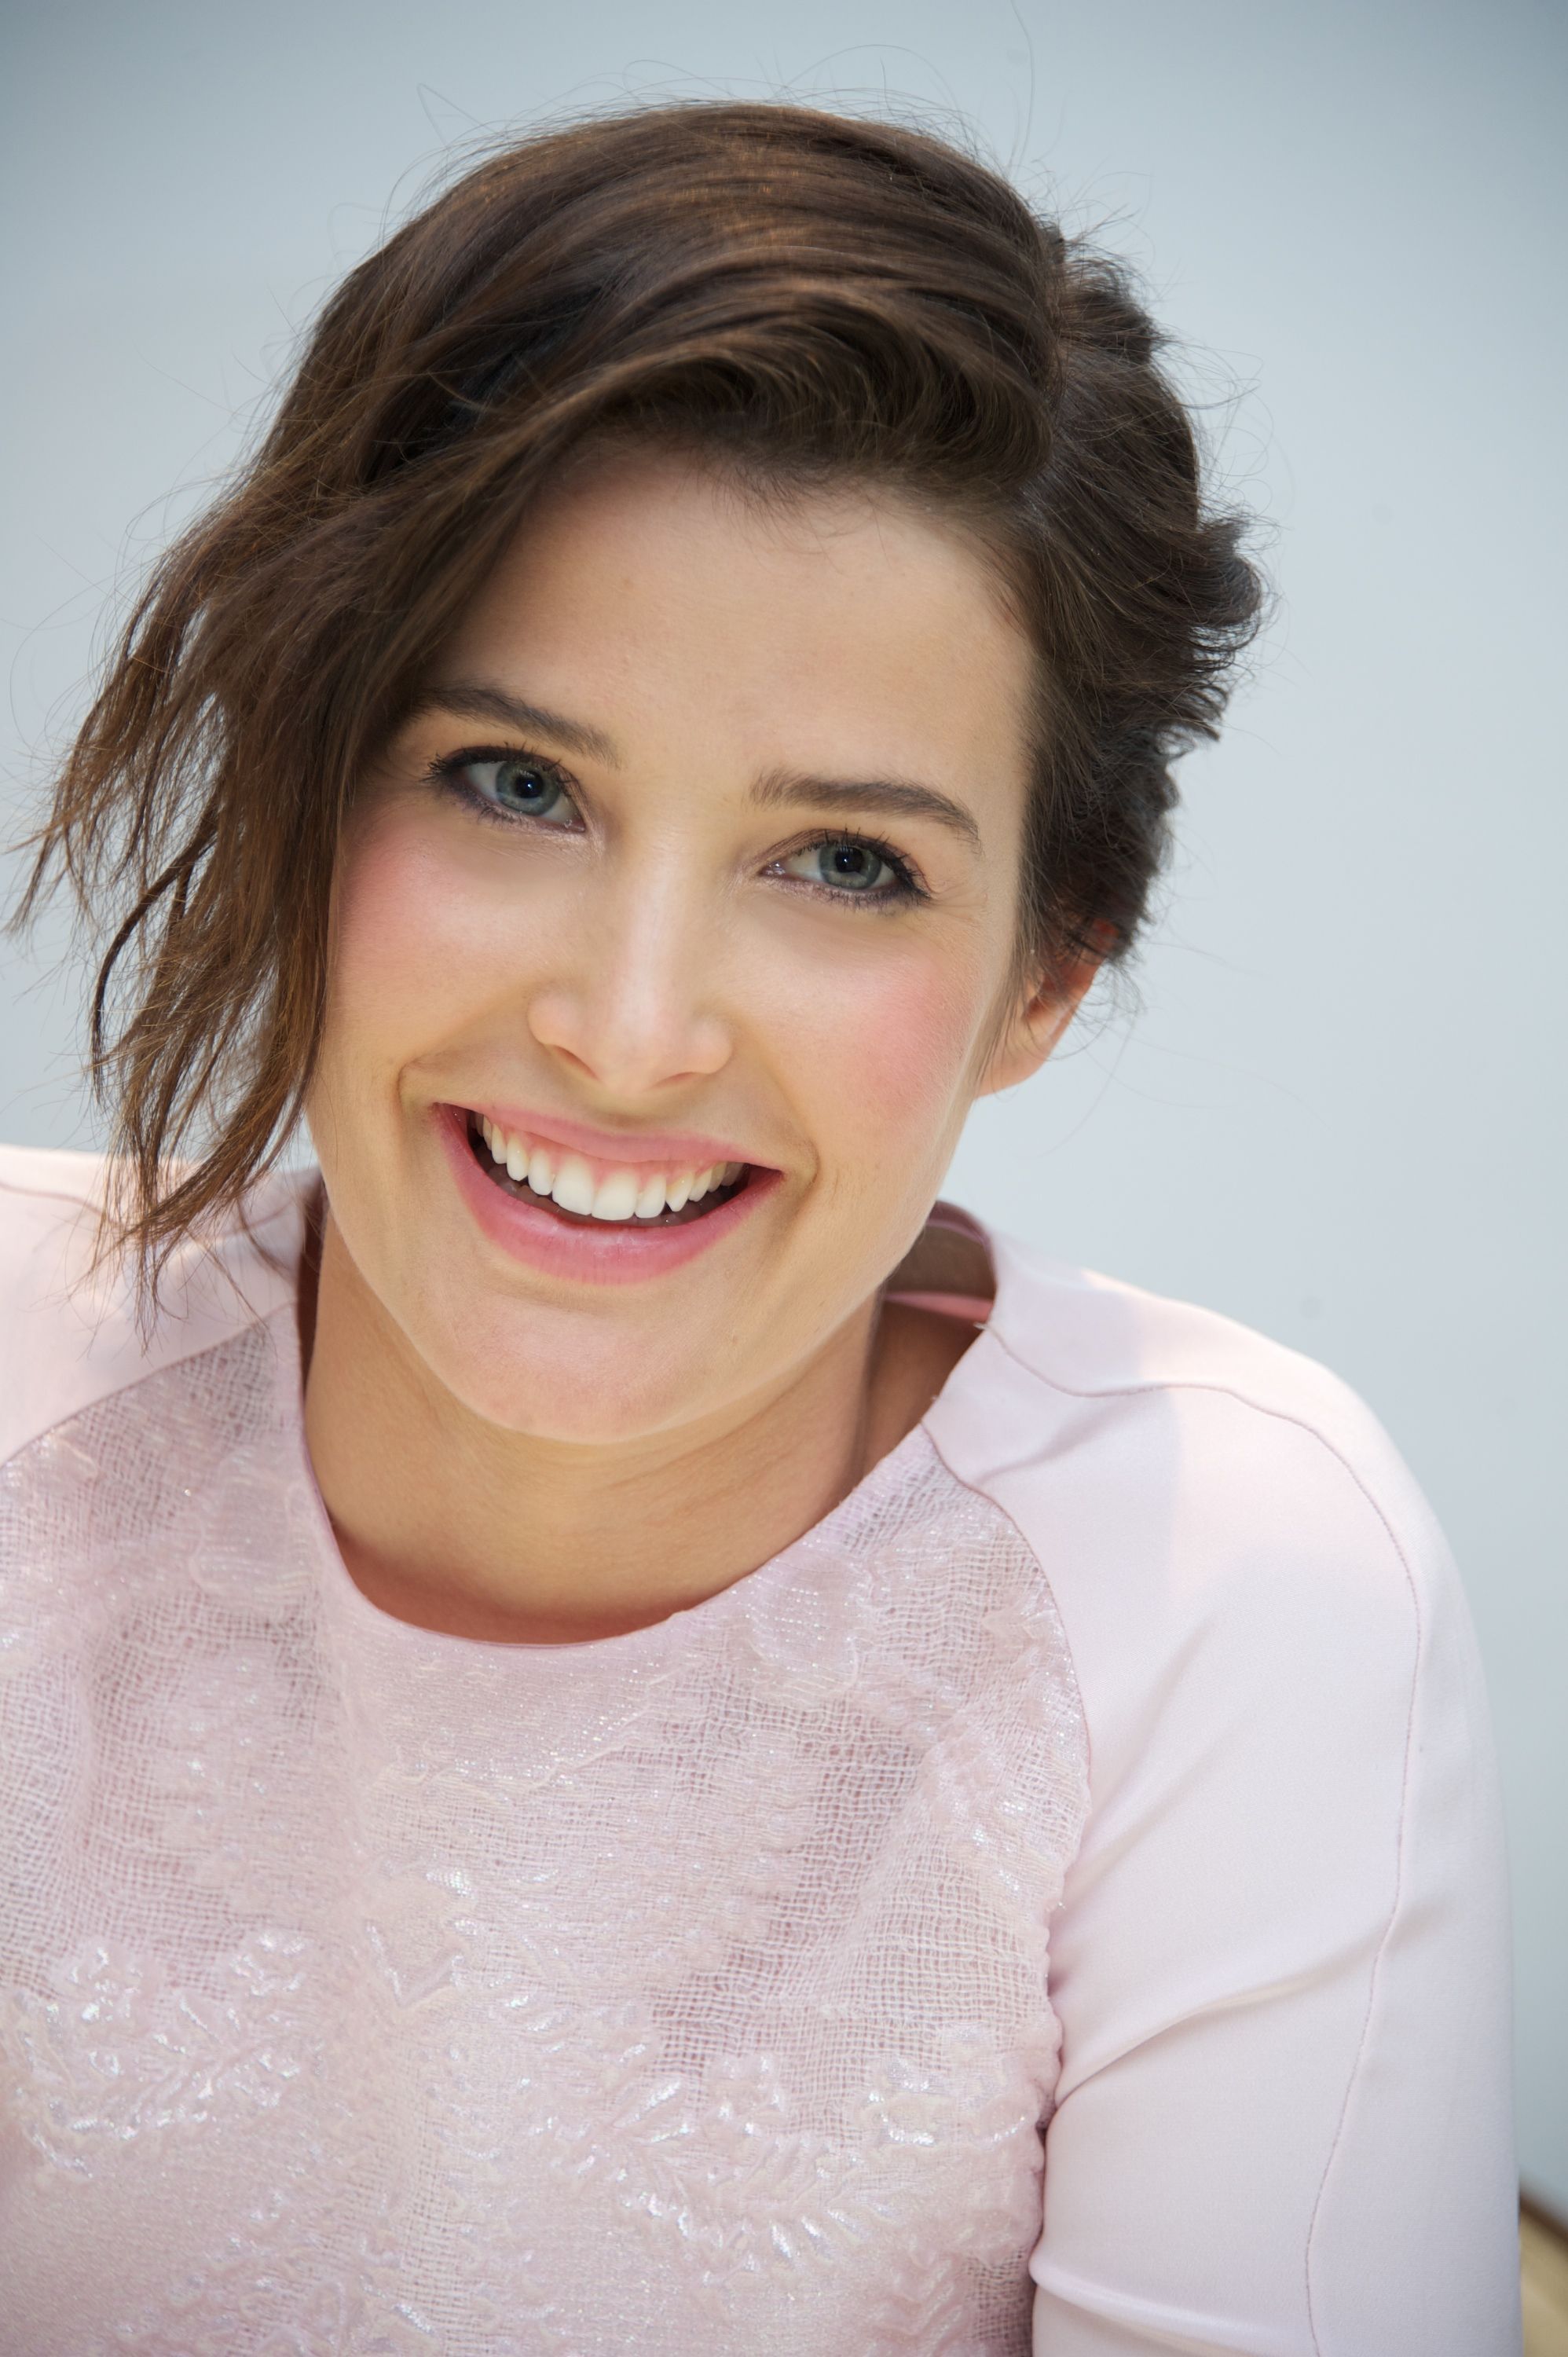 Cobie Smulders Photoshoot 2017 Wallpapers